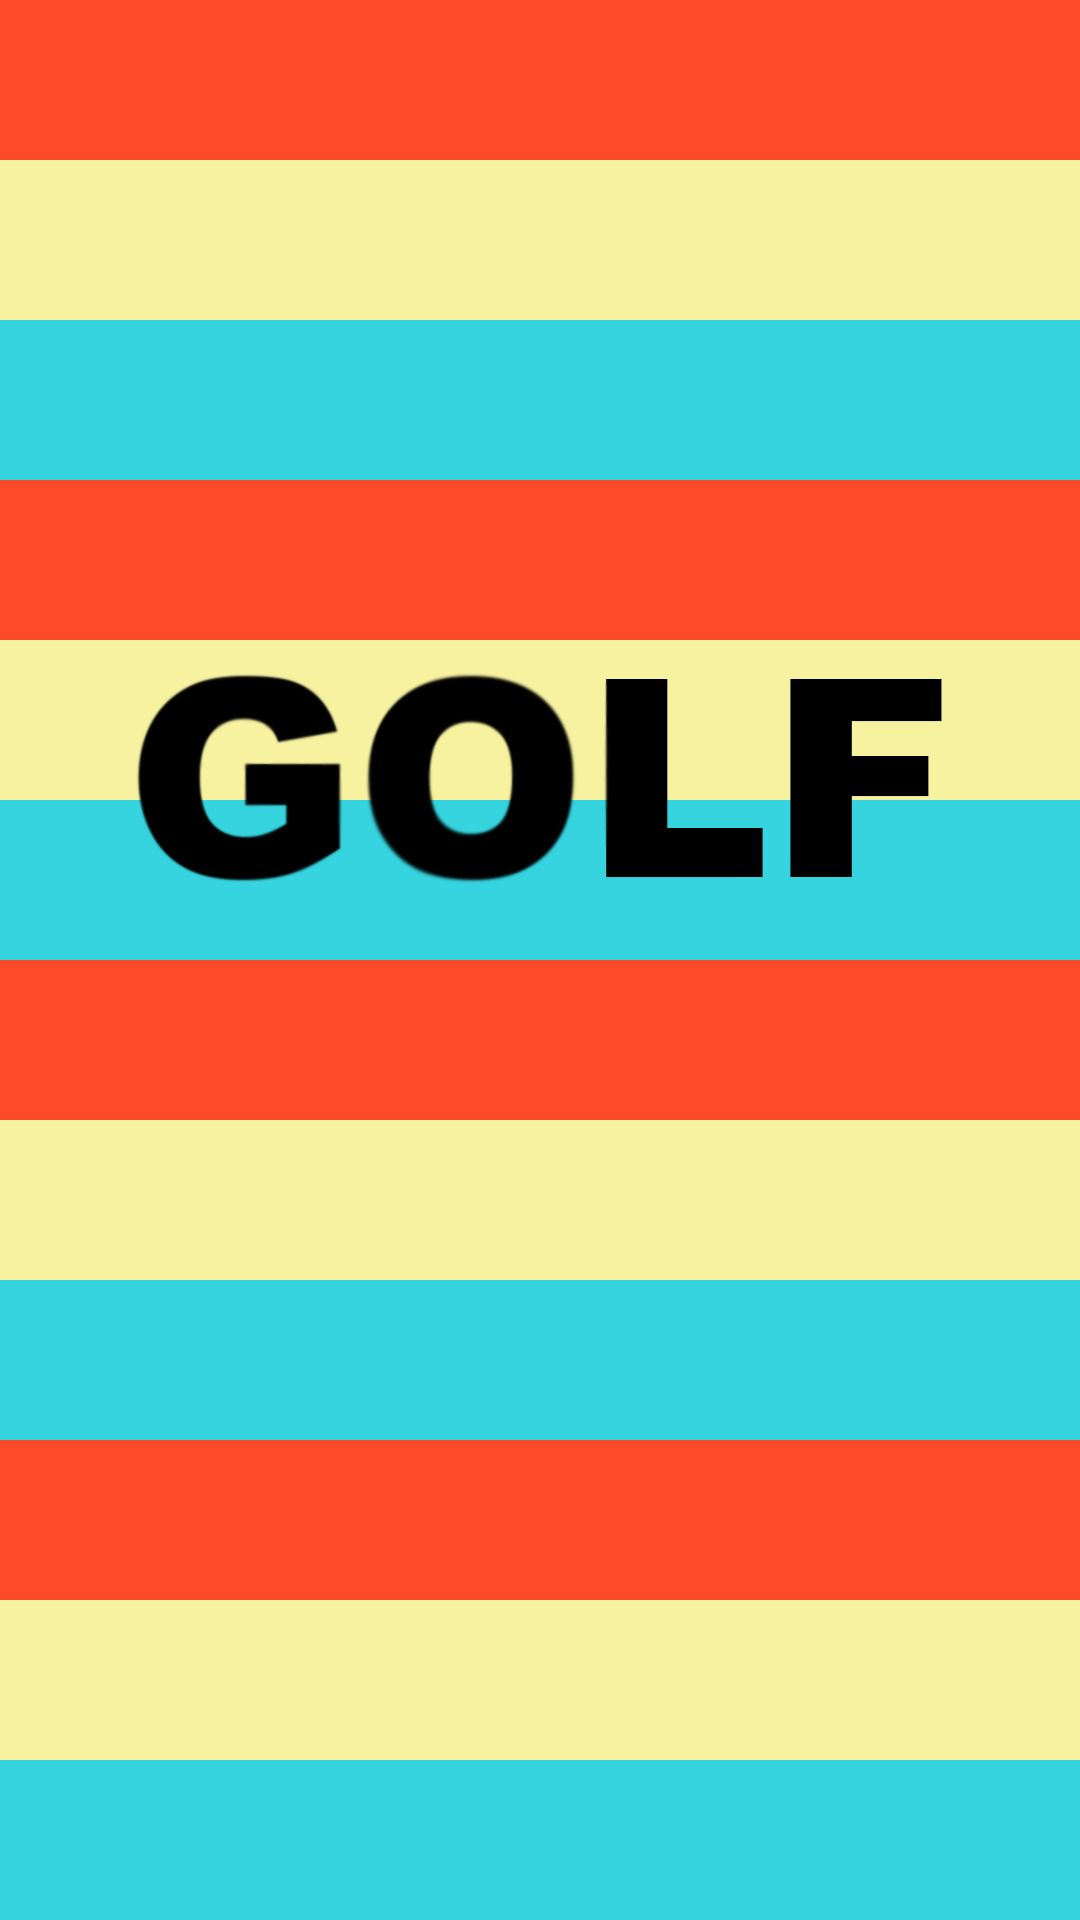 GOLF Striped Mobile Wallpaper (1080x1920) Need #iPhone S #Plus